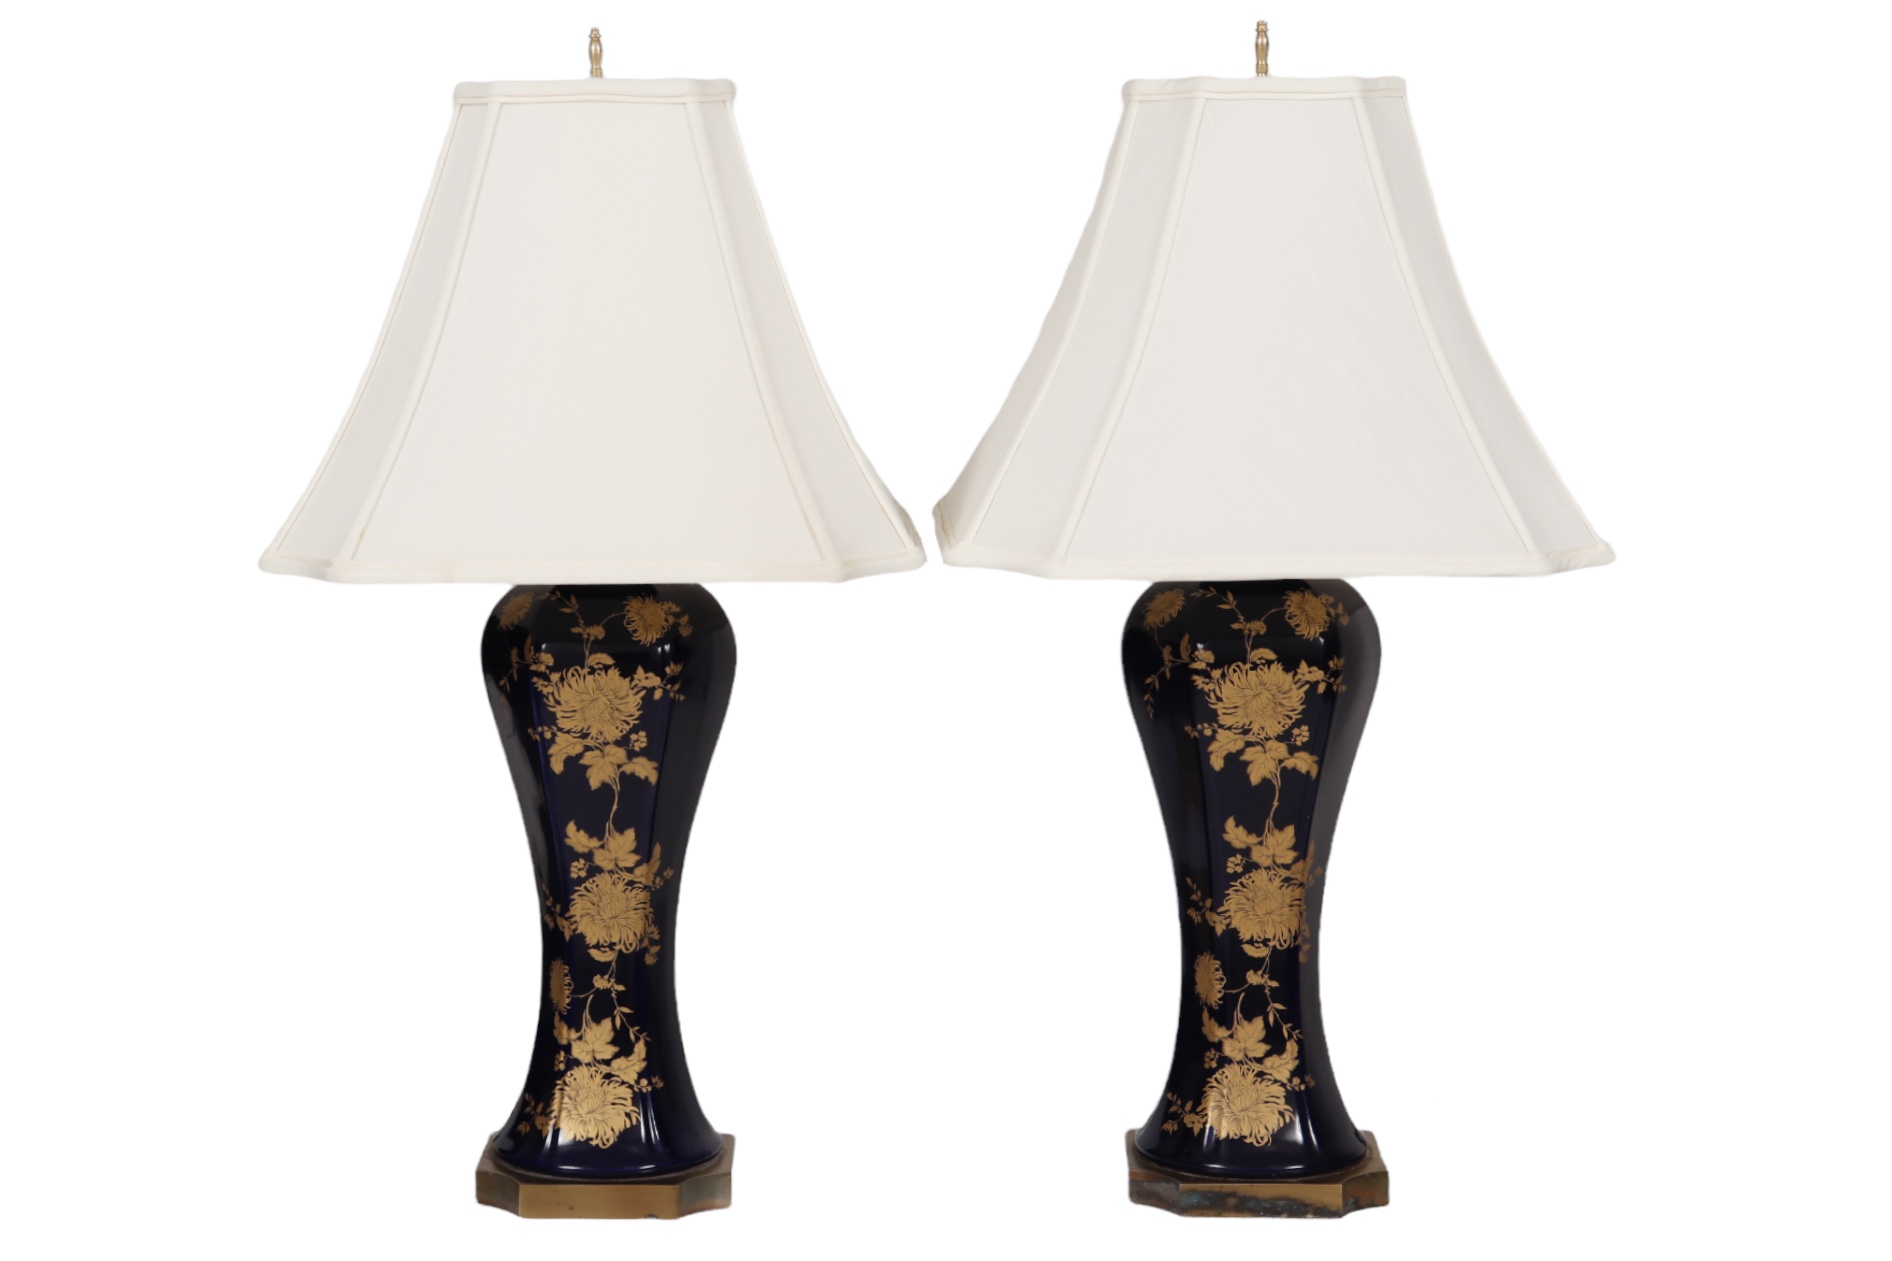 Japanese Ceramic Table Lamps - a Pair~P77657071